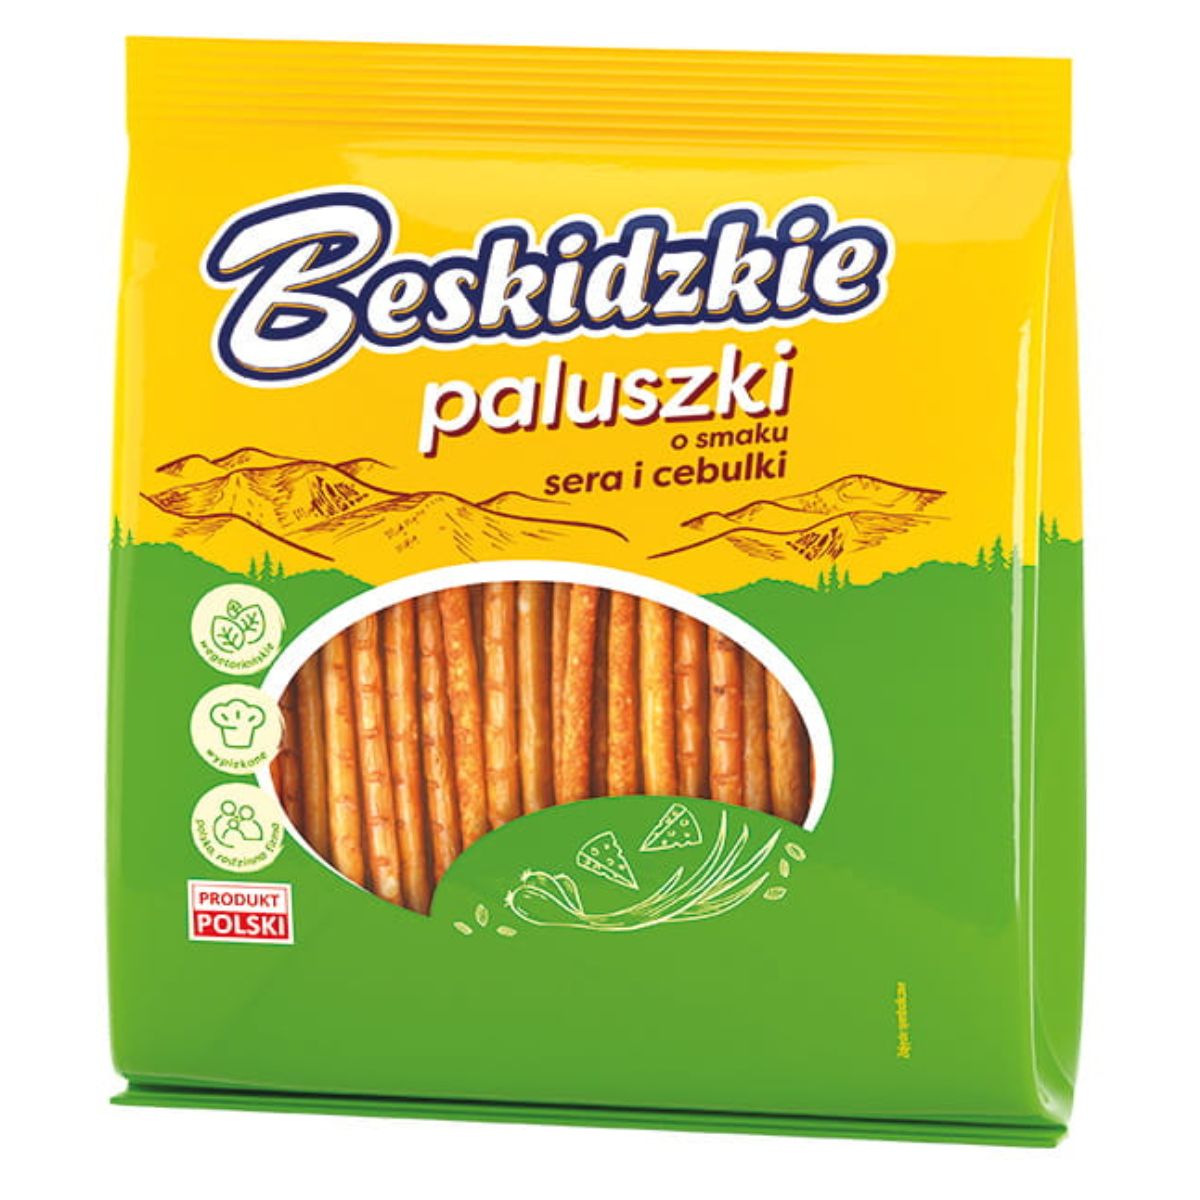 A bag of Beskidzkie - Sticks with Cheese and Onion Flavour - 180g.